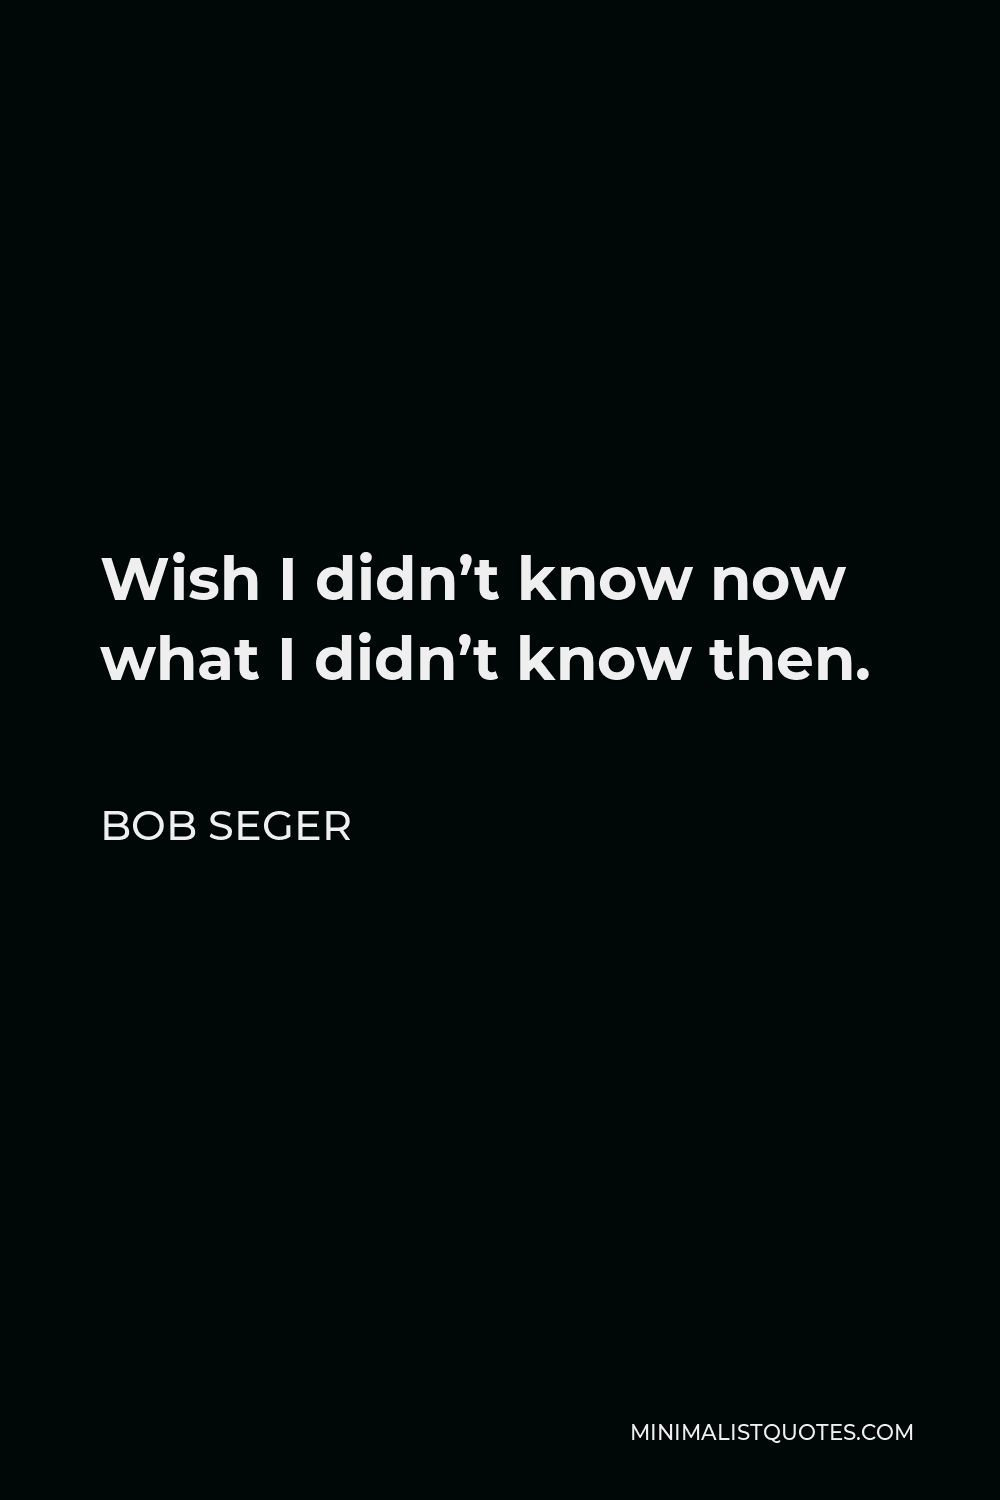 Bob Seger Quote - Wish I didn’t know now what I didn’t know then.